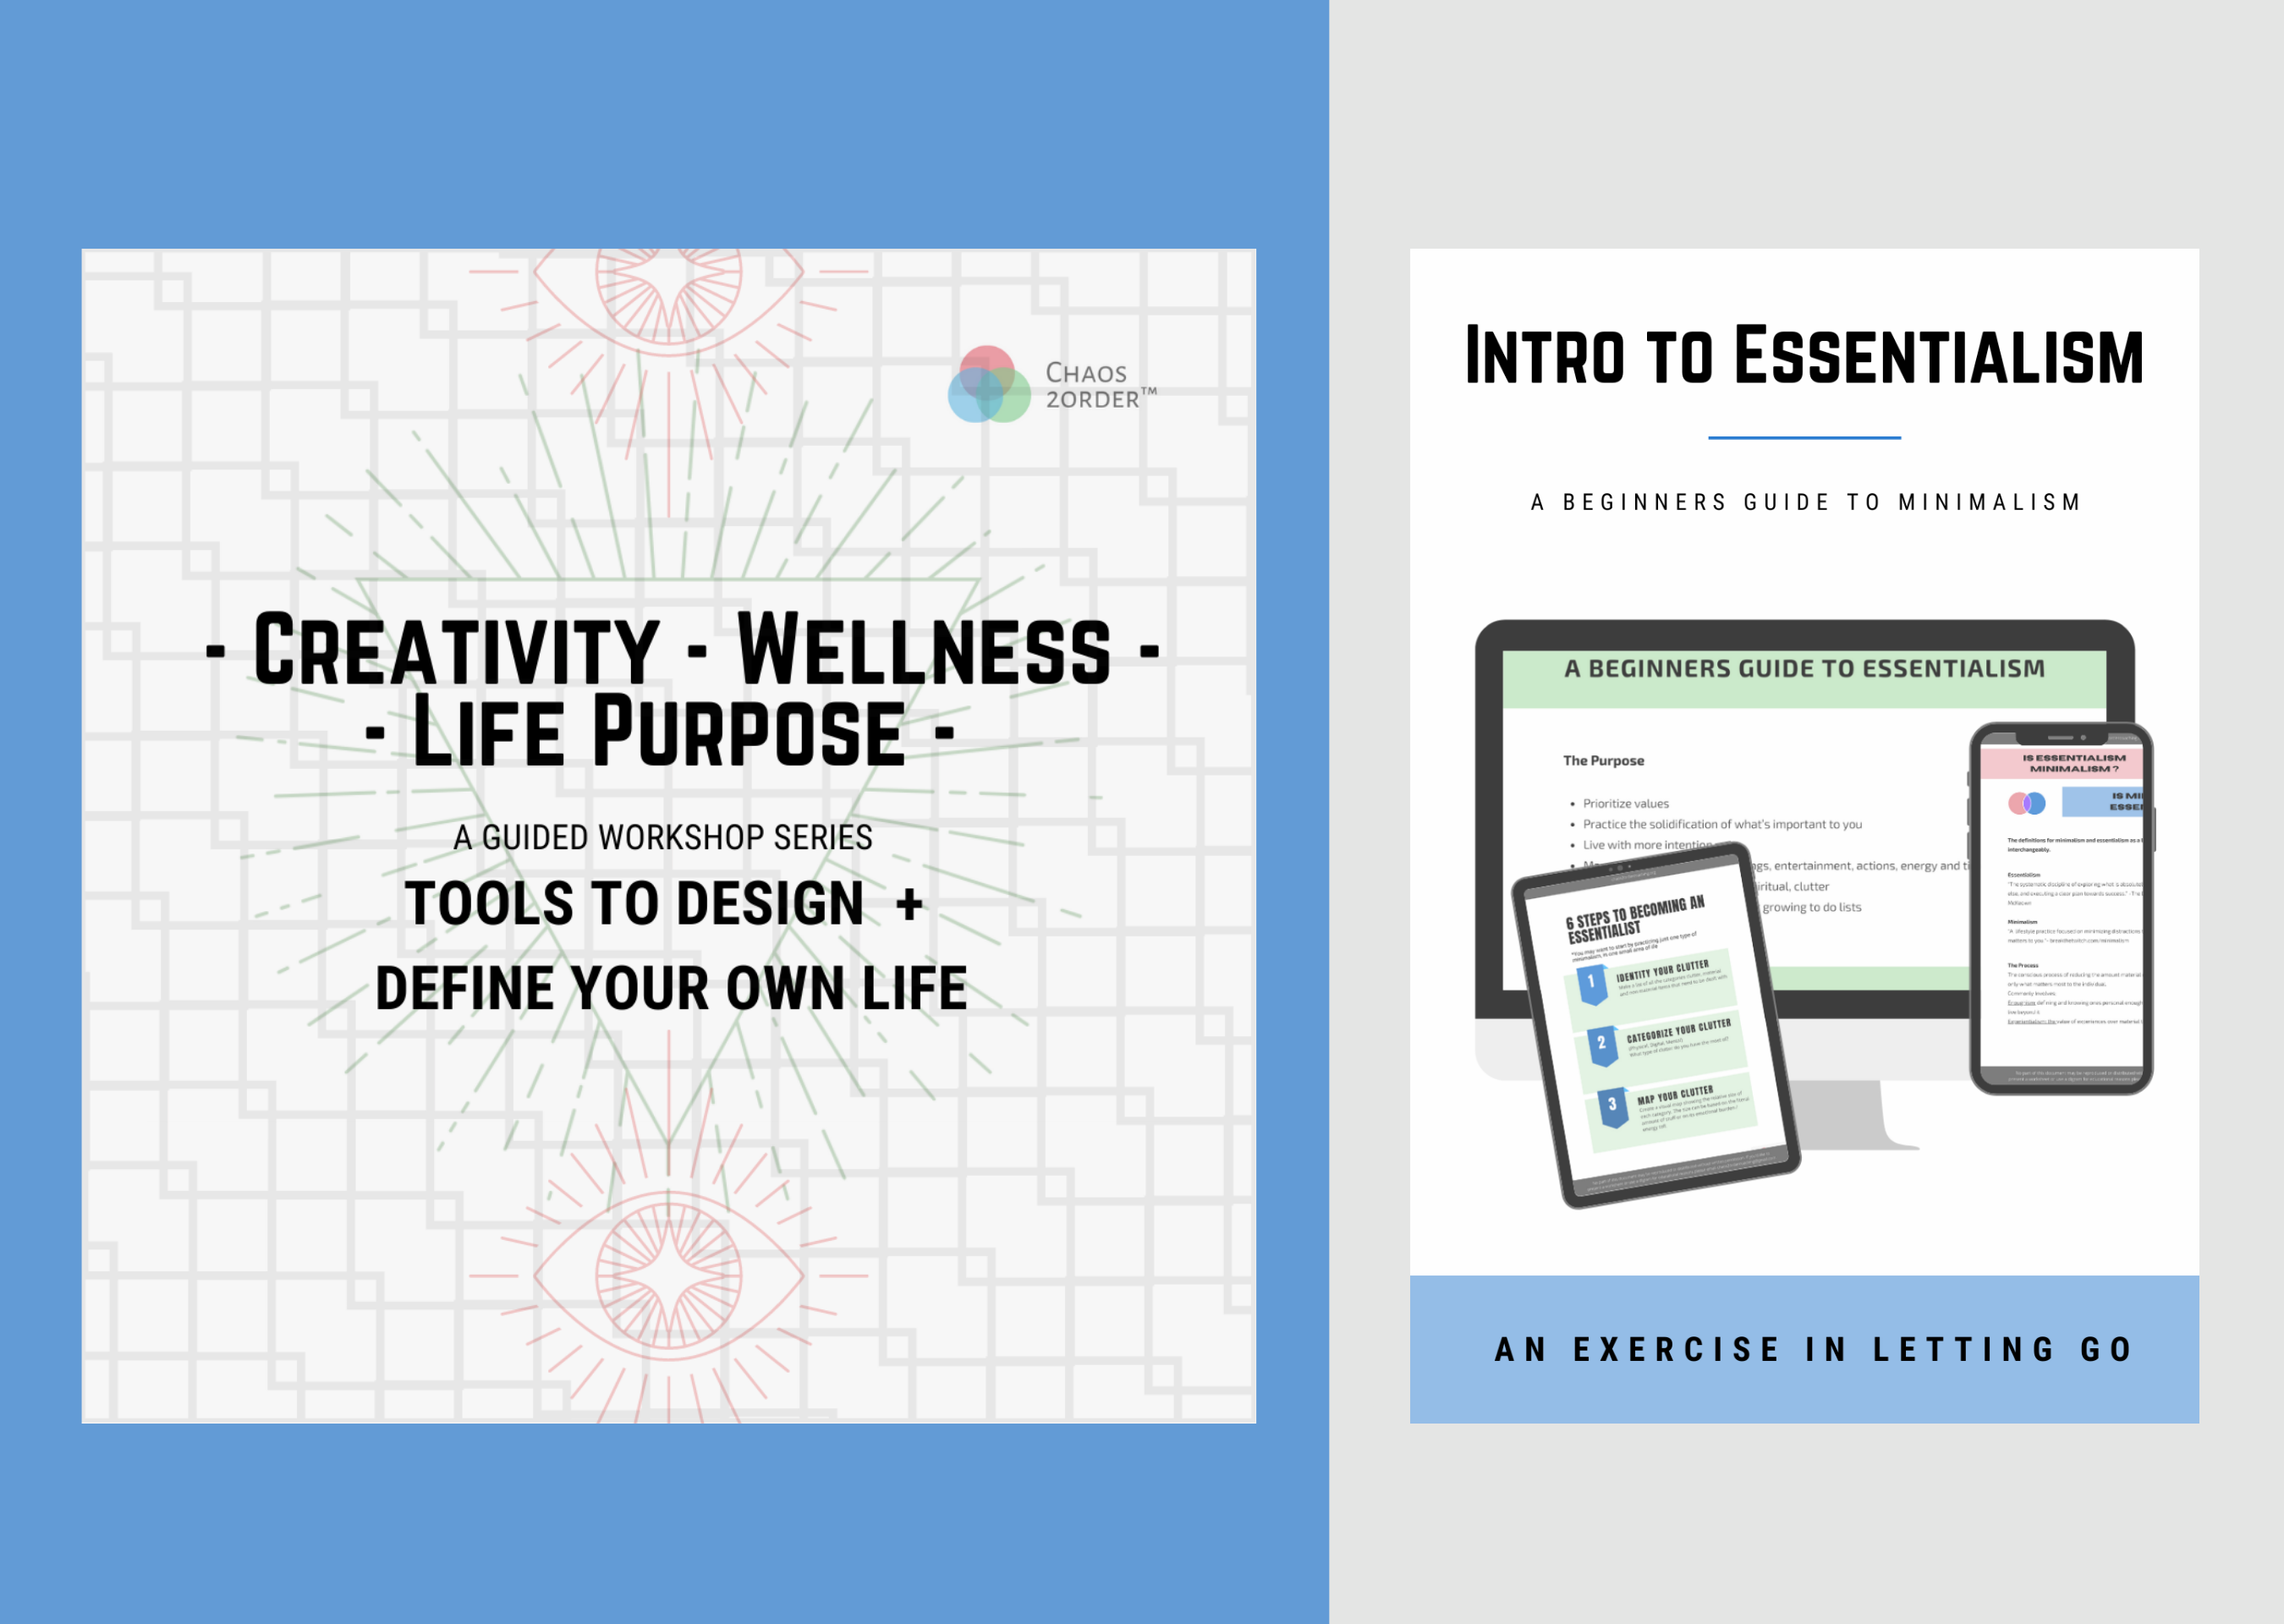 Creativity - Wellness - Life Purpose - Guided Workshop Series, A Beginners Guide To Essentialism